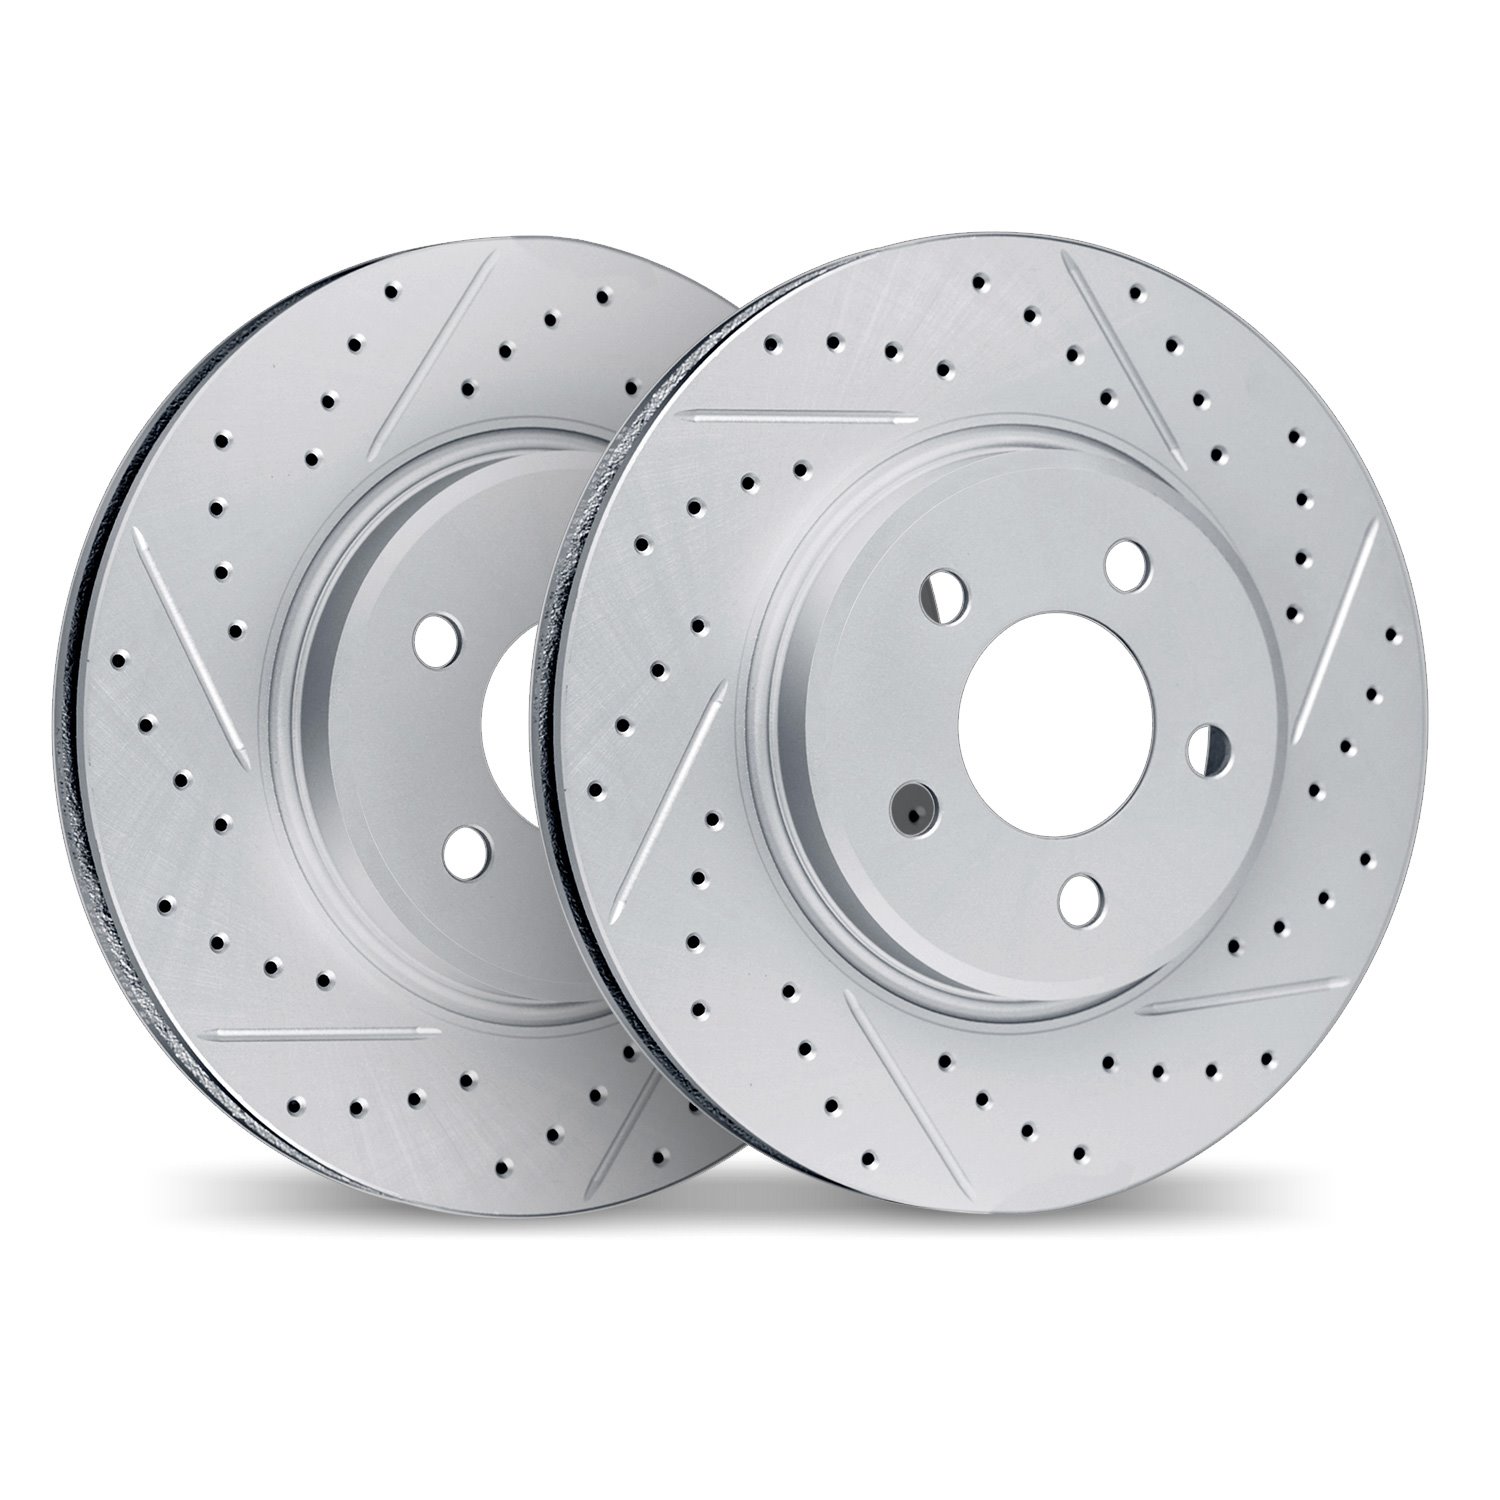 2002-54025 Geoperformance Drilled/Slotted Brake Rotors, 2015-2020 Ford/Lincoln/Mercury/Mazda, Position: Front